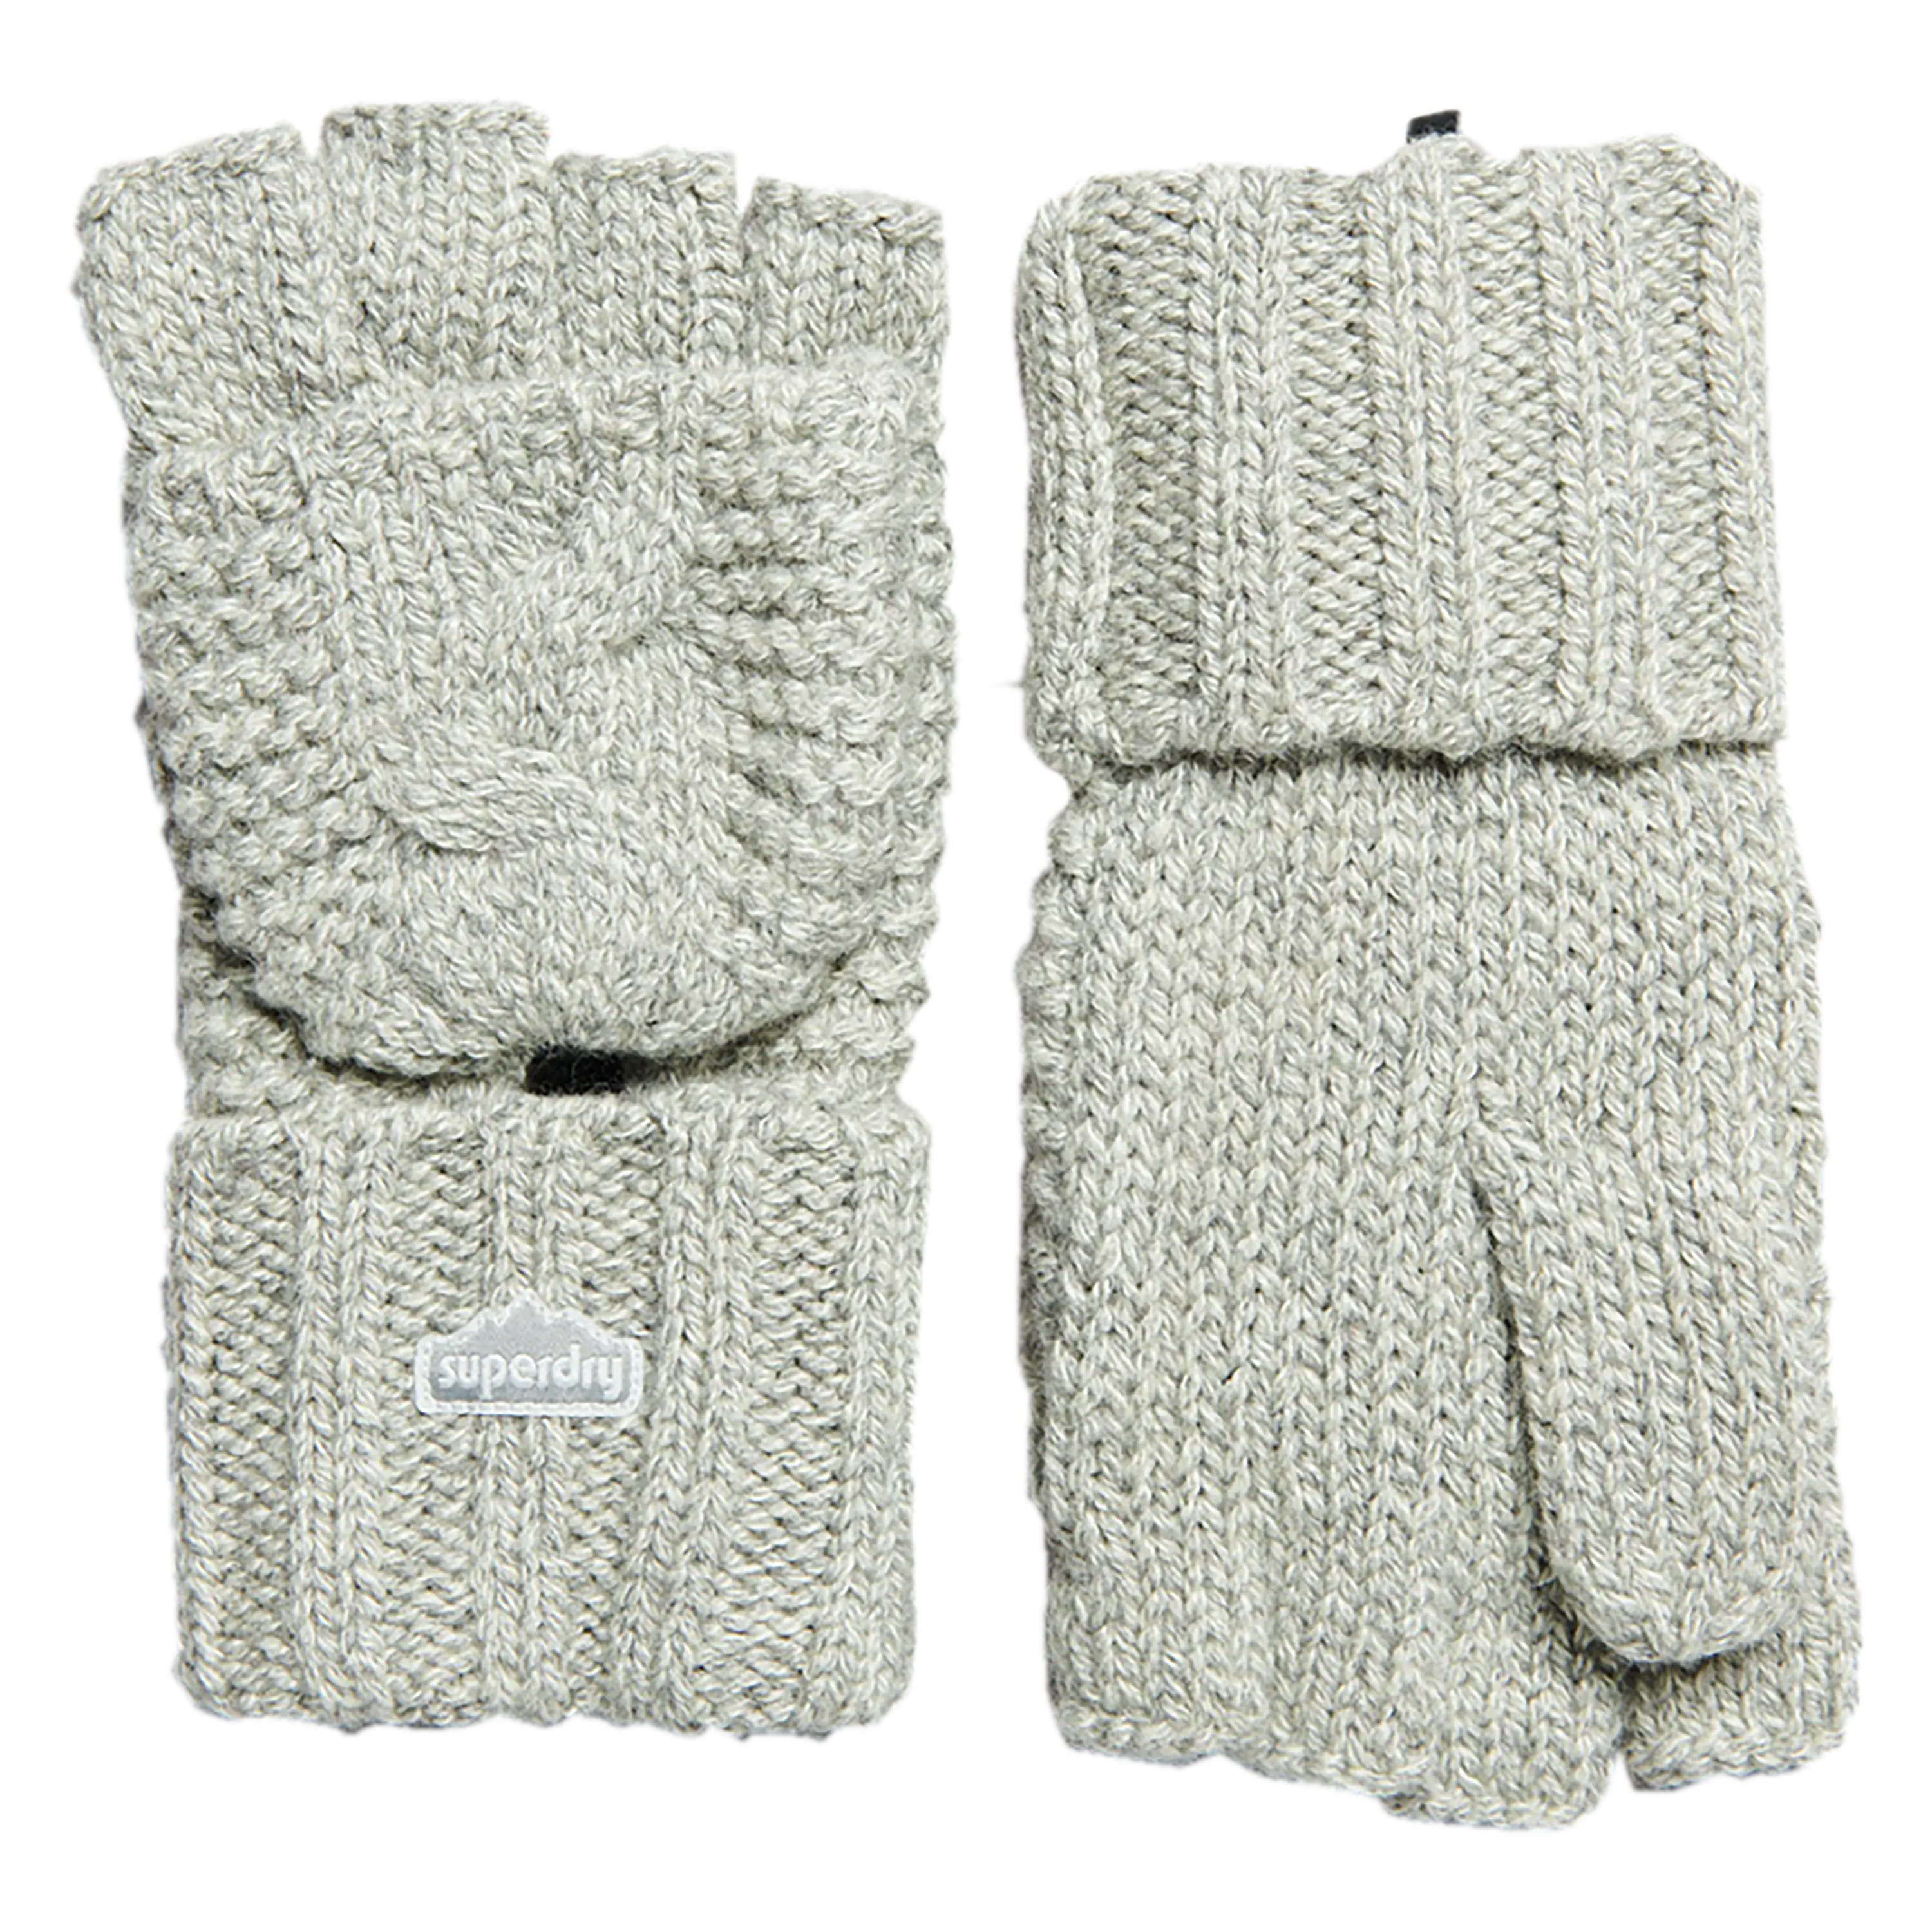 Superdry Vintage Cable Gloves for Women